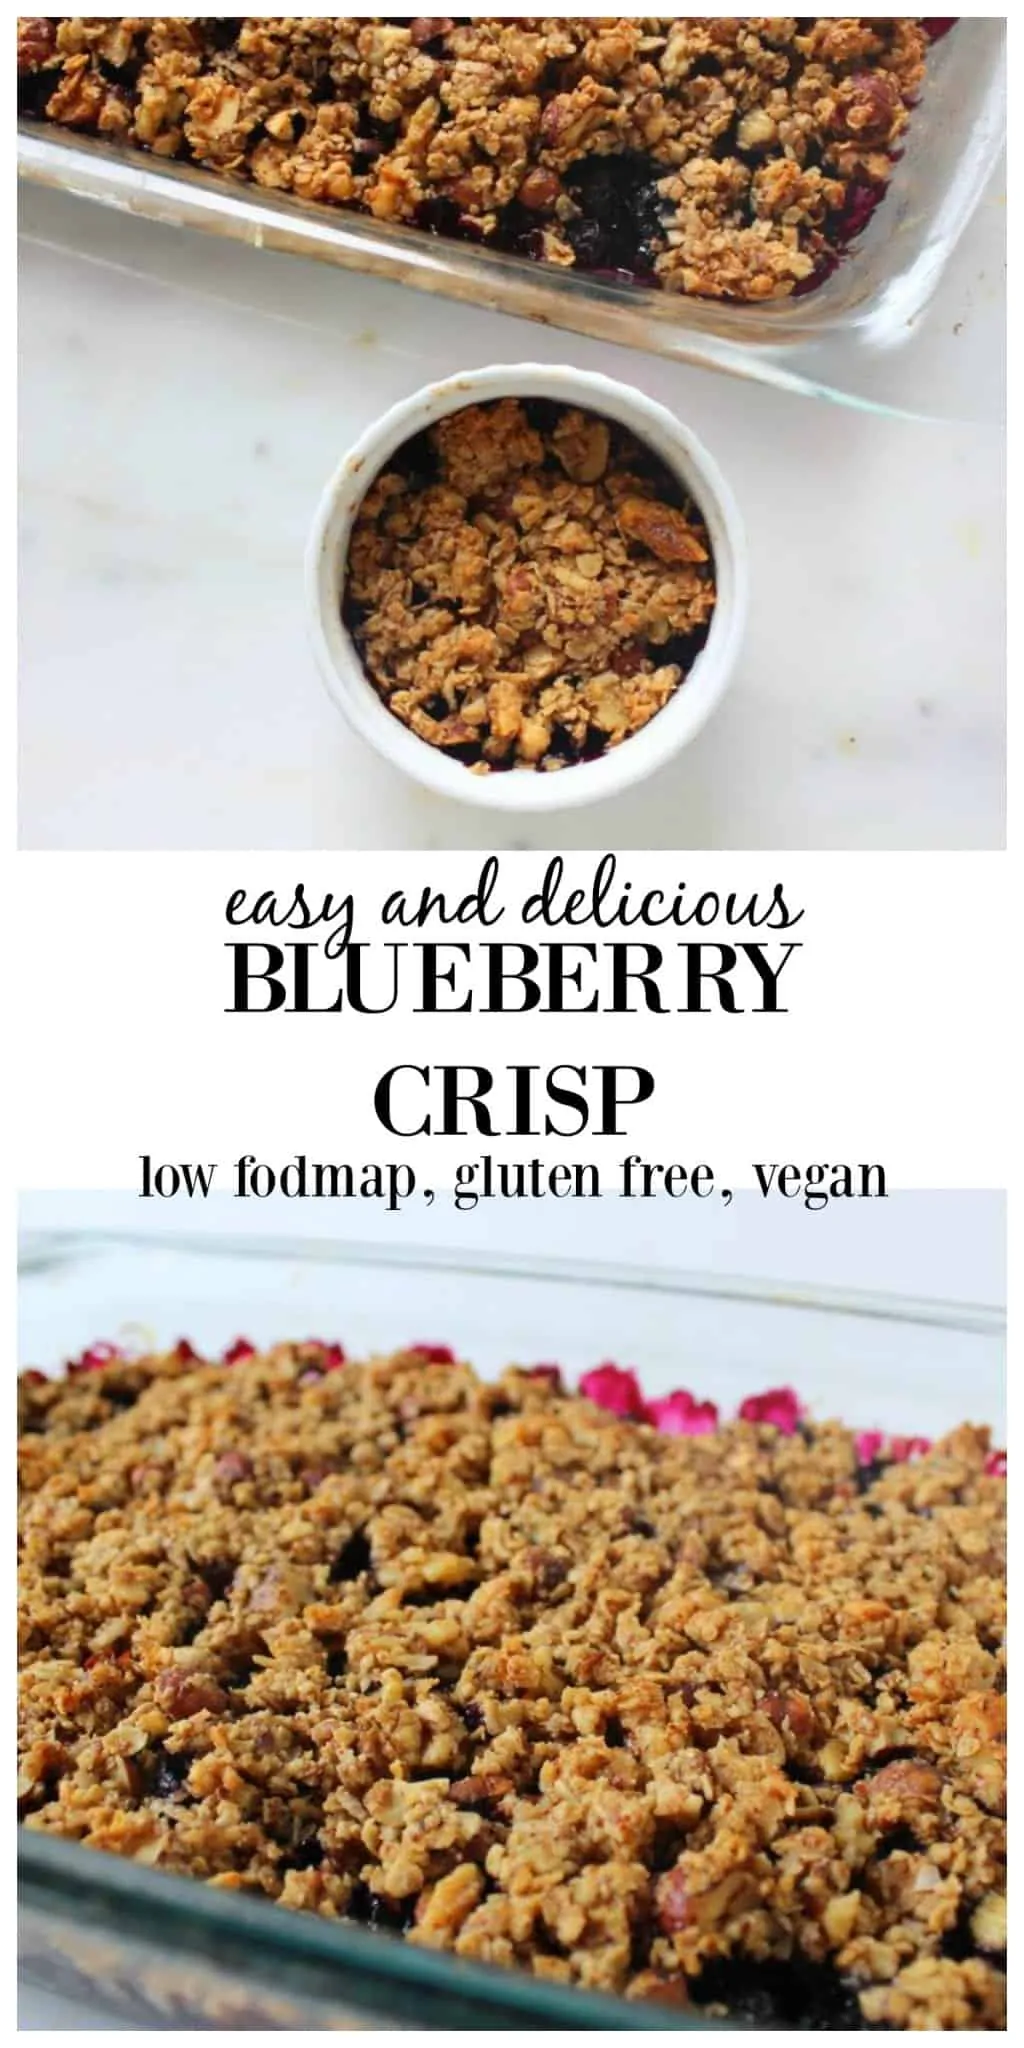 Easy and Delicious Blueberry Crisp from Treble in the Kitchen